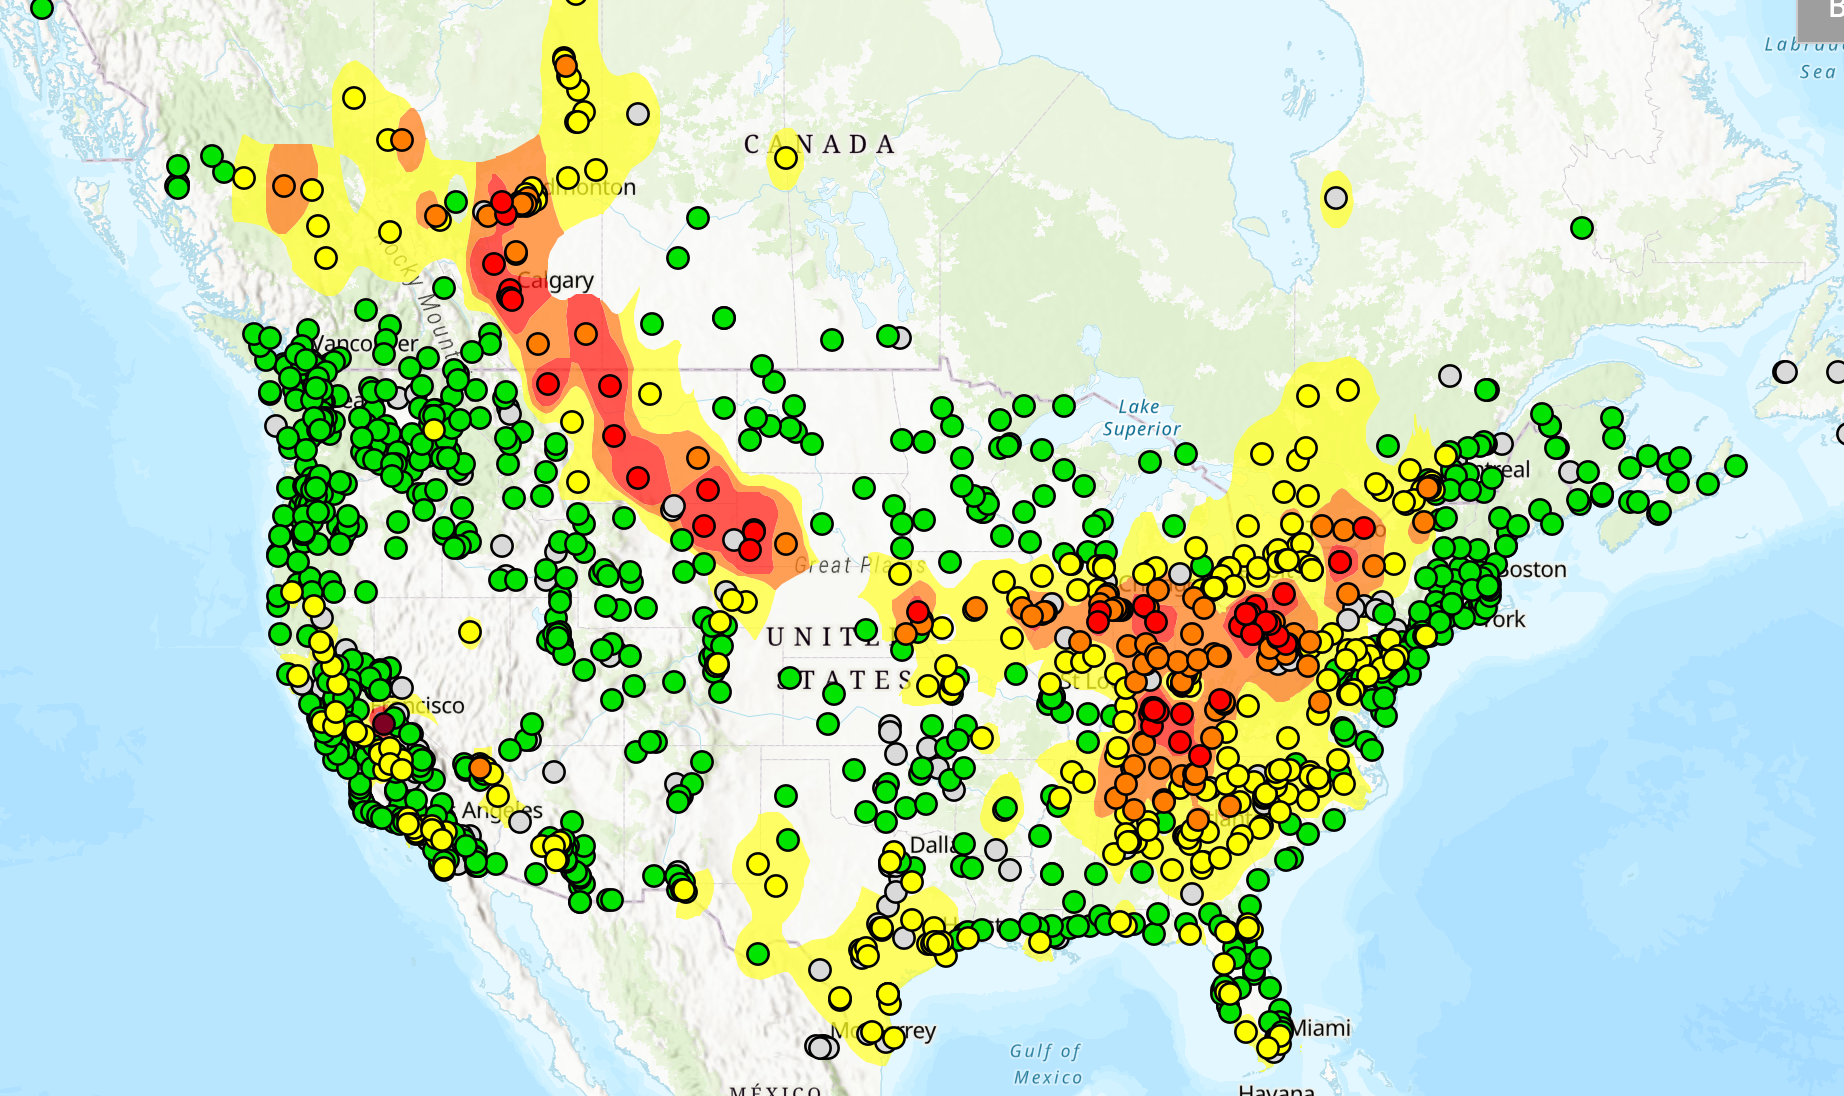 Air quality dropped across America’s heartland and northeast again this week due to Canadian wildfire smoke